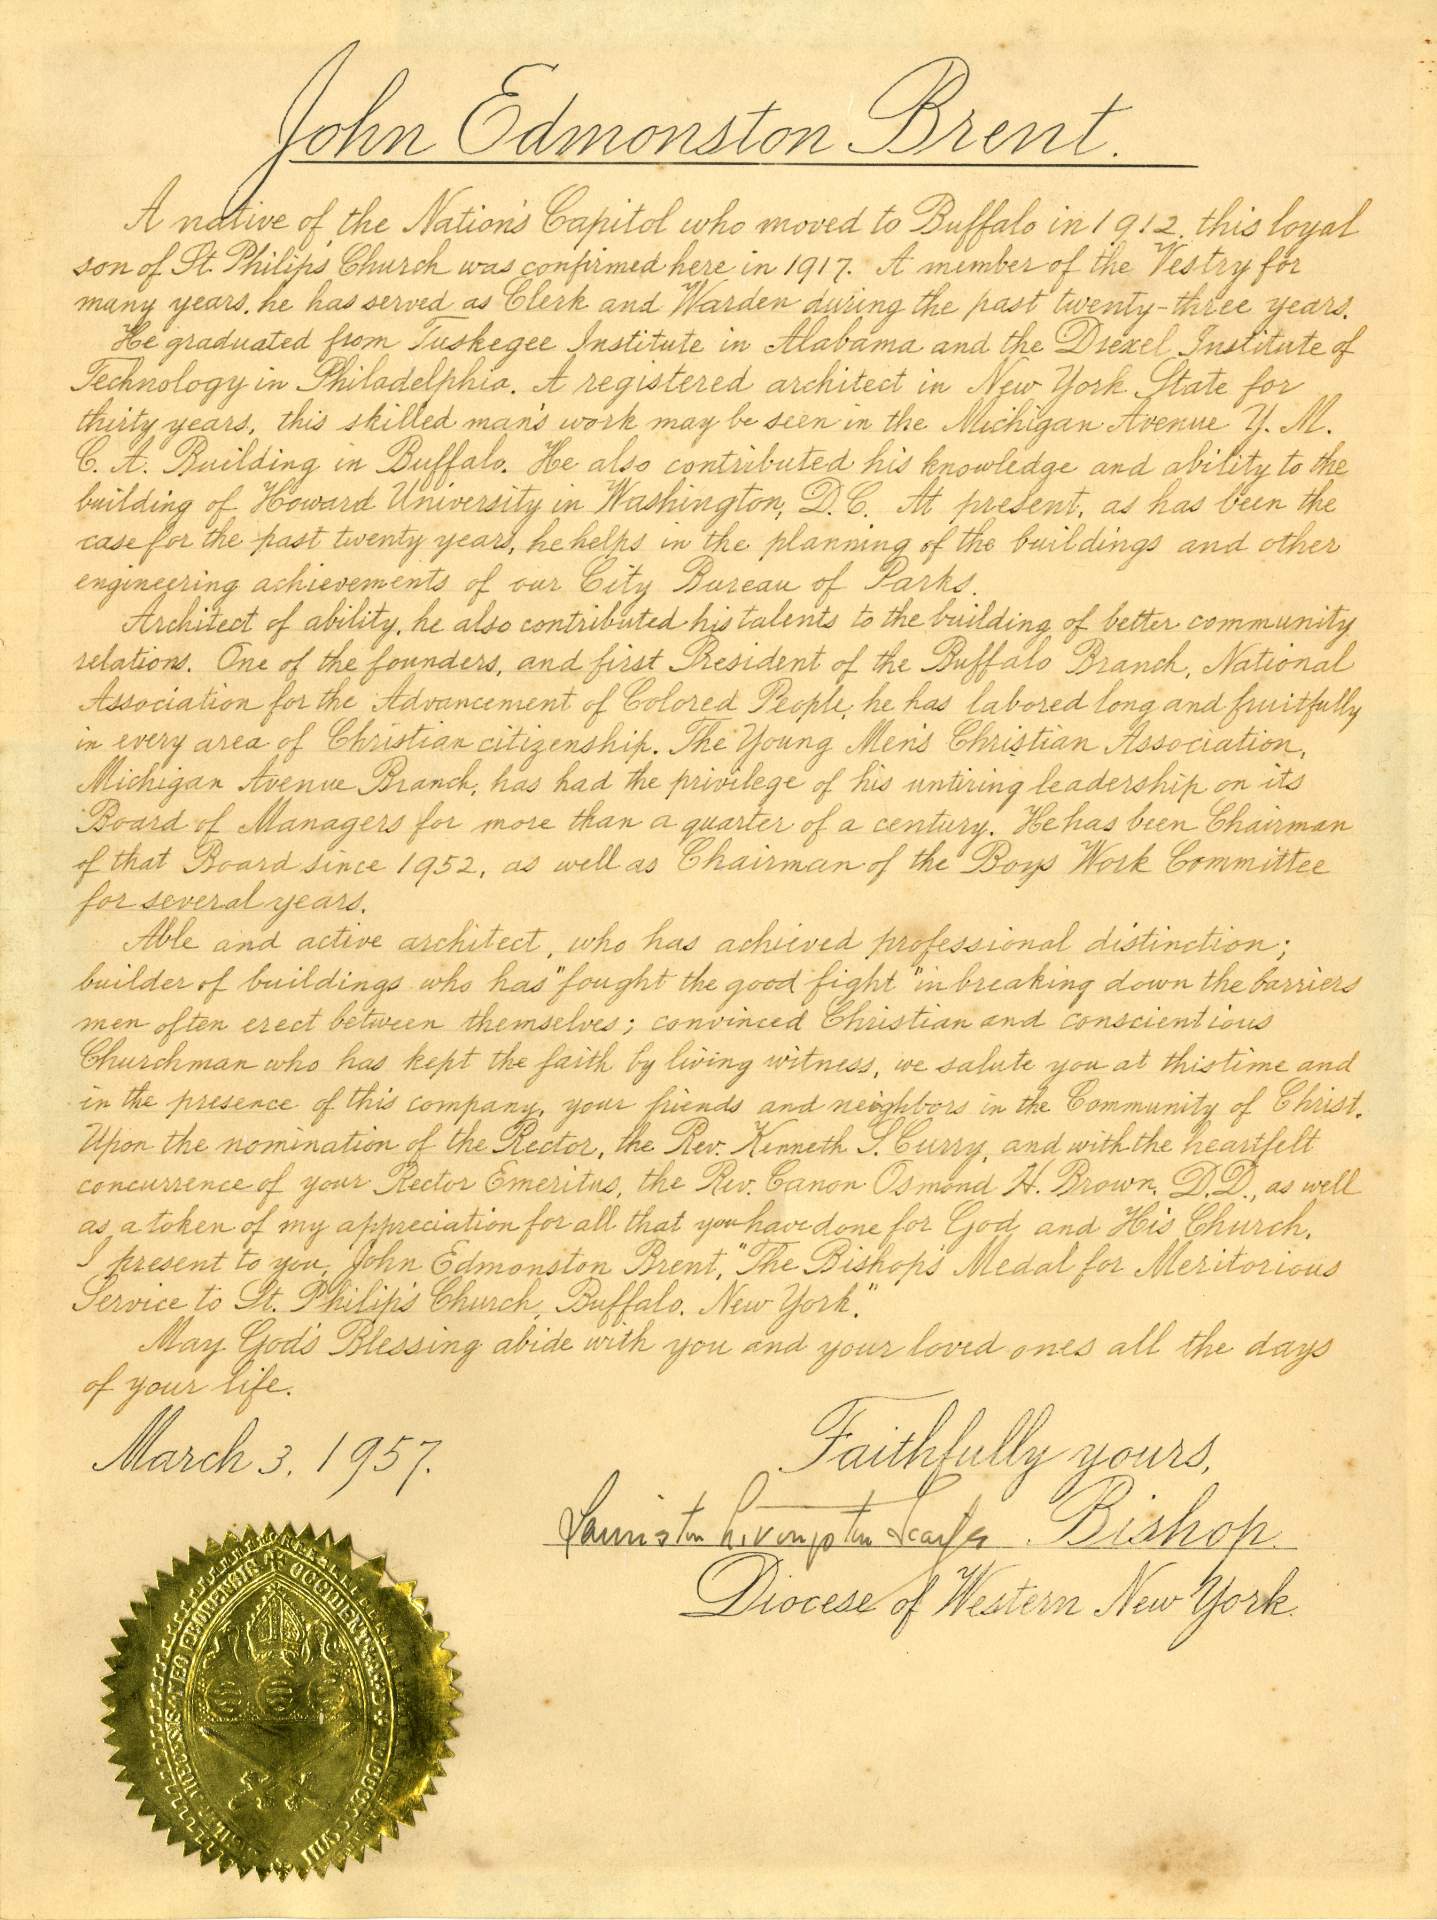 John Edmonston Brent (Hand-written proclamation of his achievements acknowledged by the Bishop of the Diocese of Western New York)